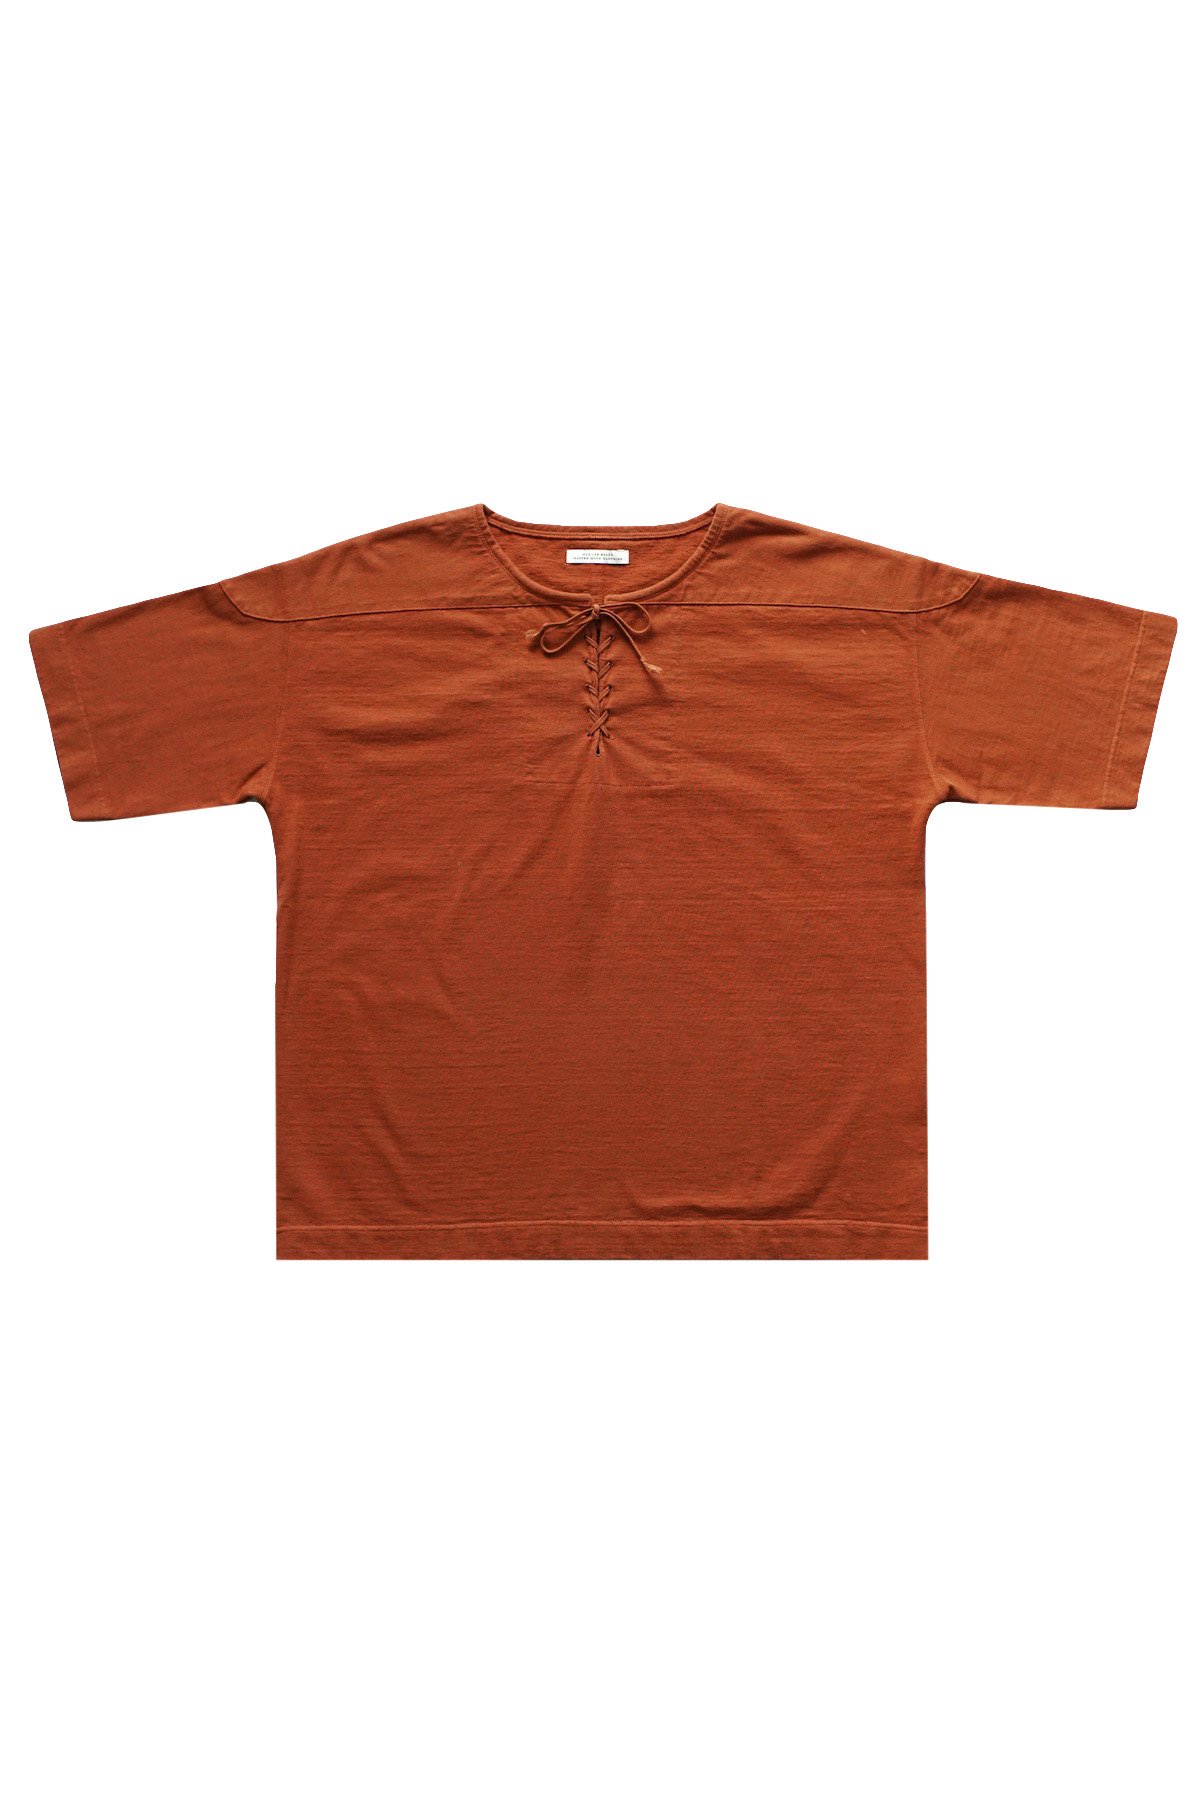 OLD JOE  - EXCLUSIVE LACED FRONT RUGGER SHIRTS - COPPER